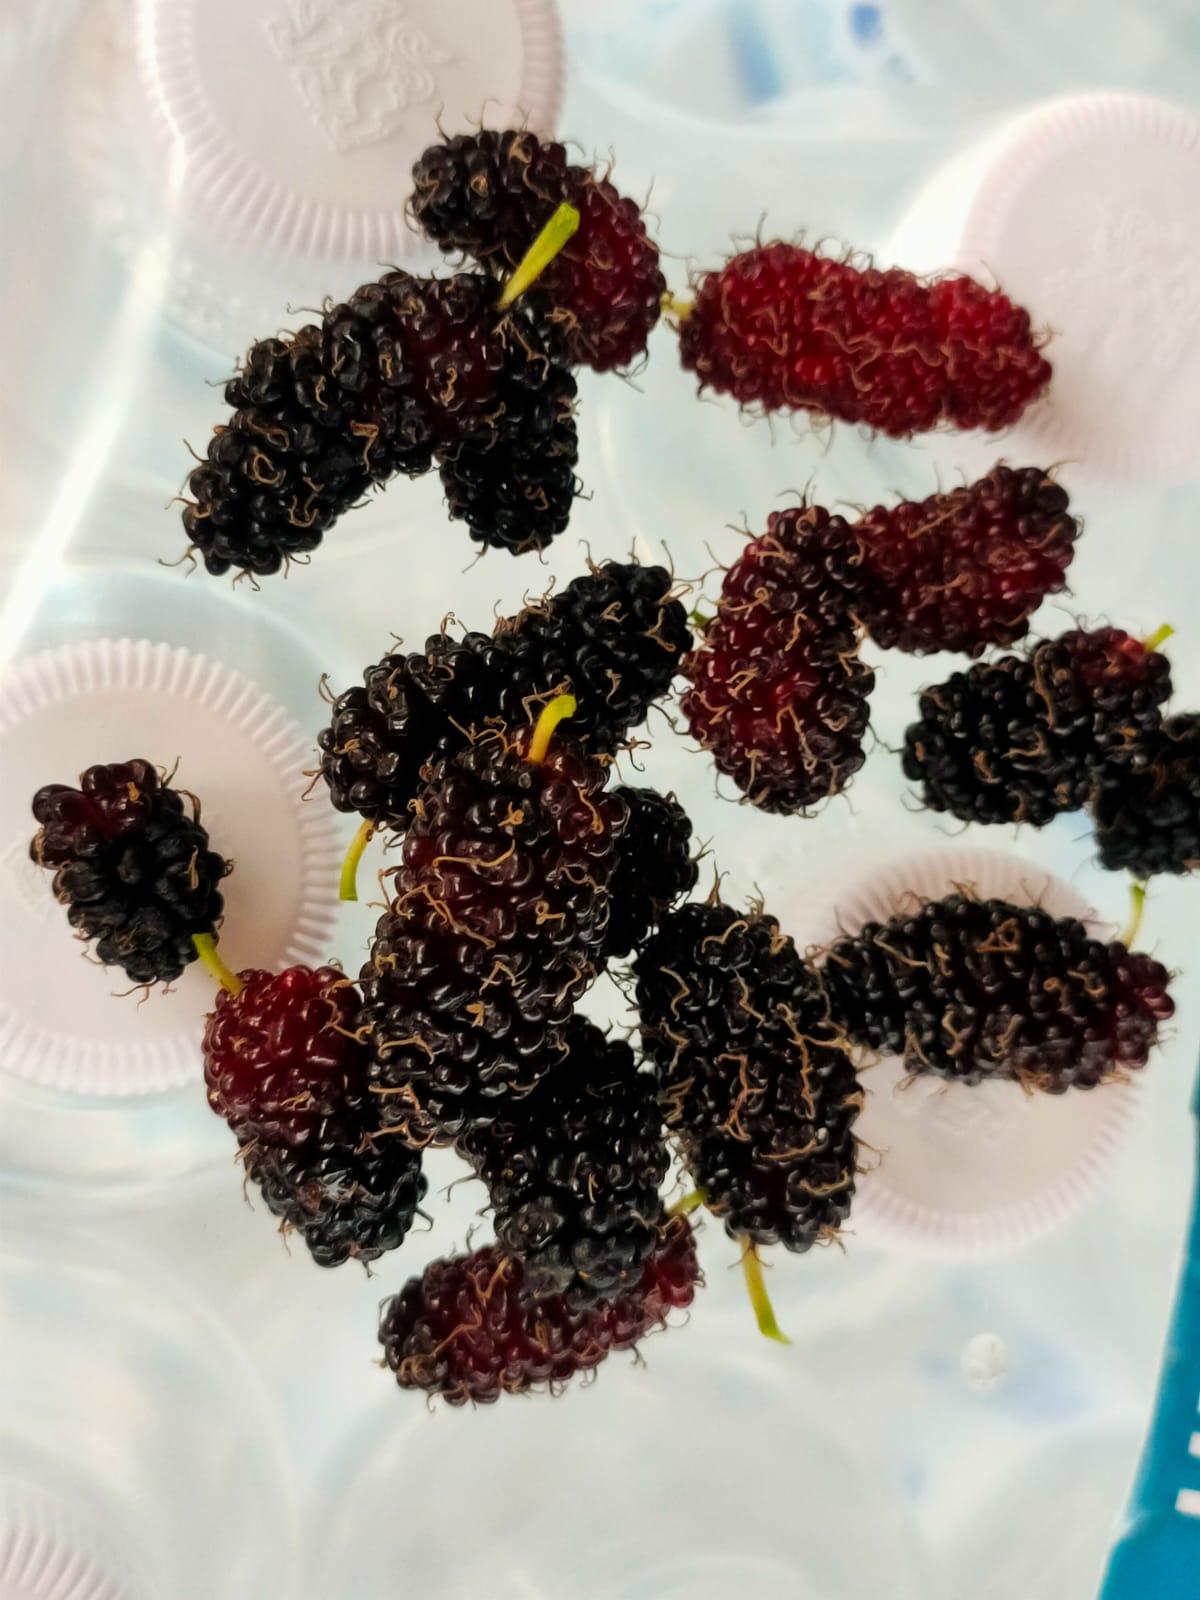 Mulberry ready for eat